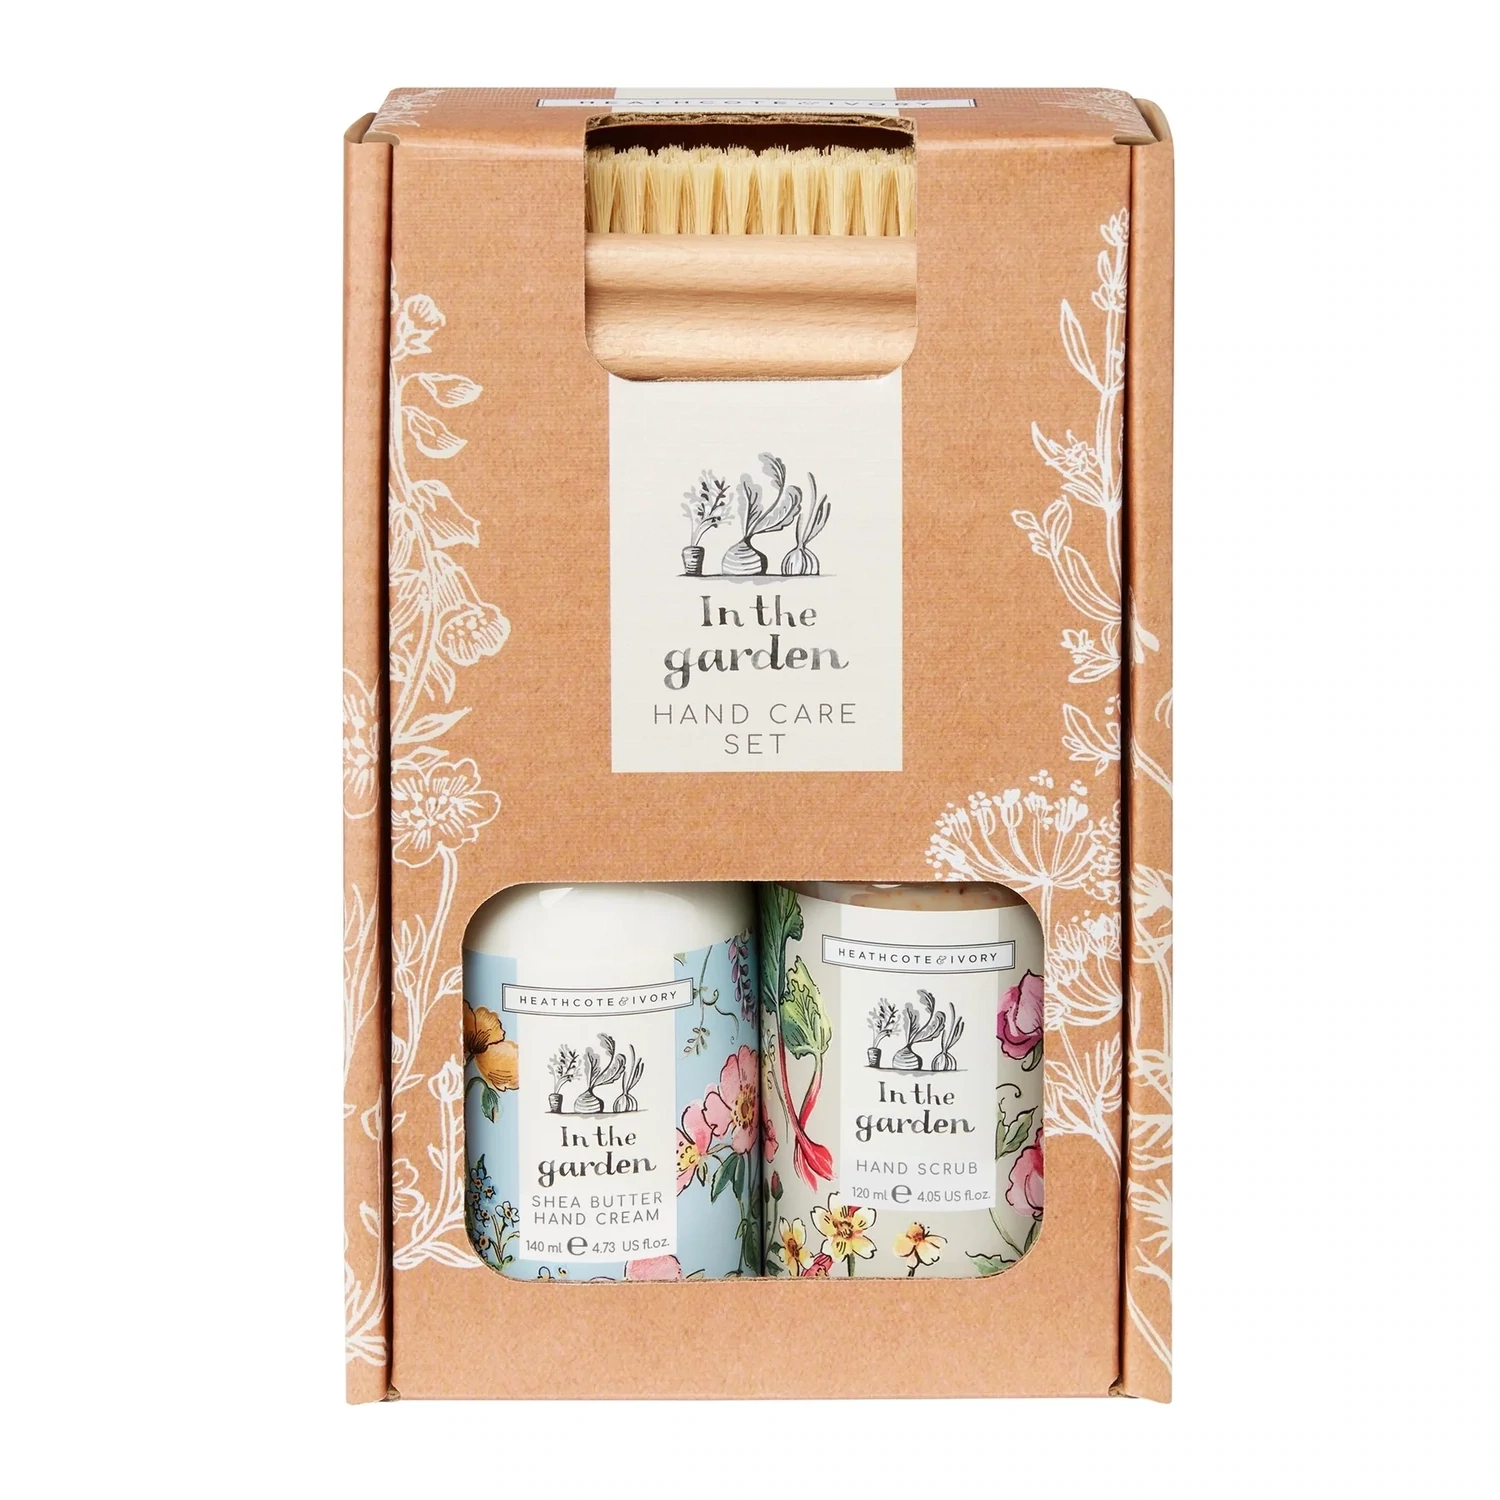 Heathcote & Ivory | In The Garden Hand Care Set